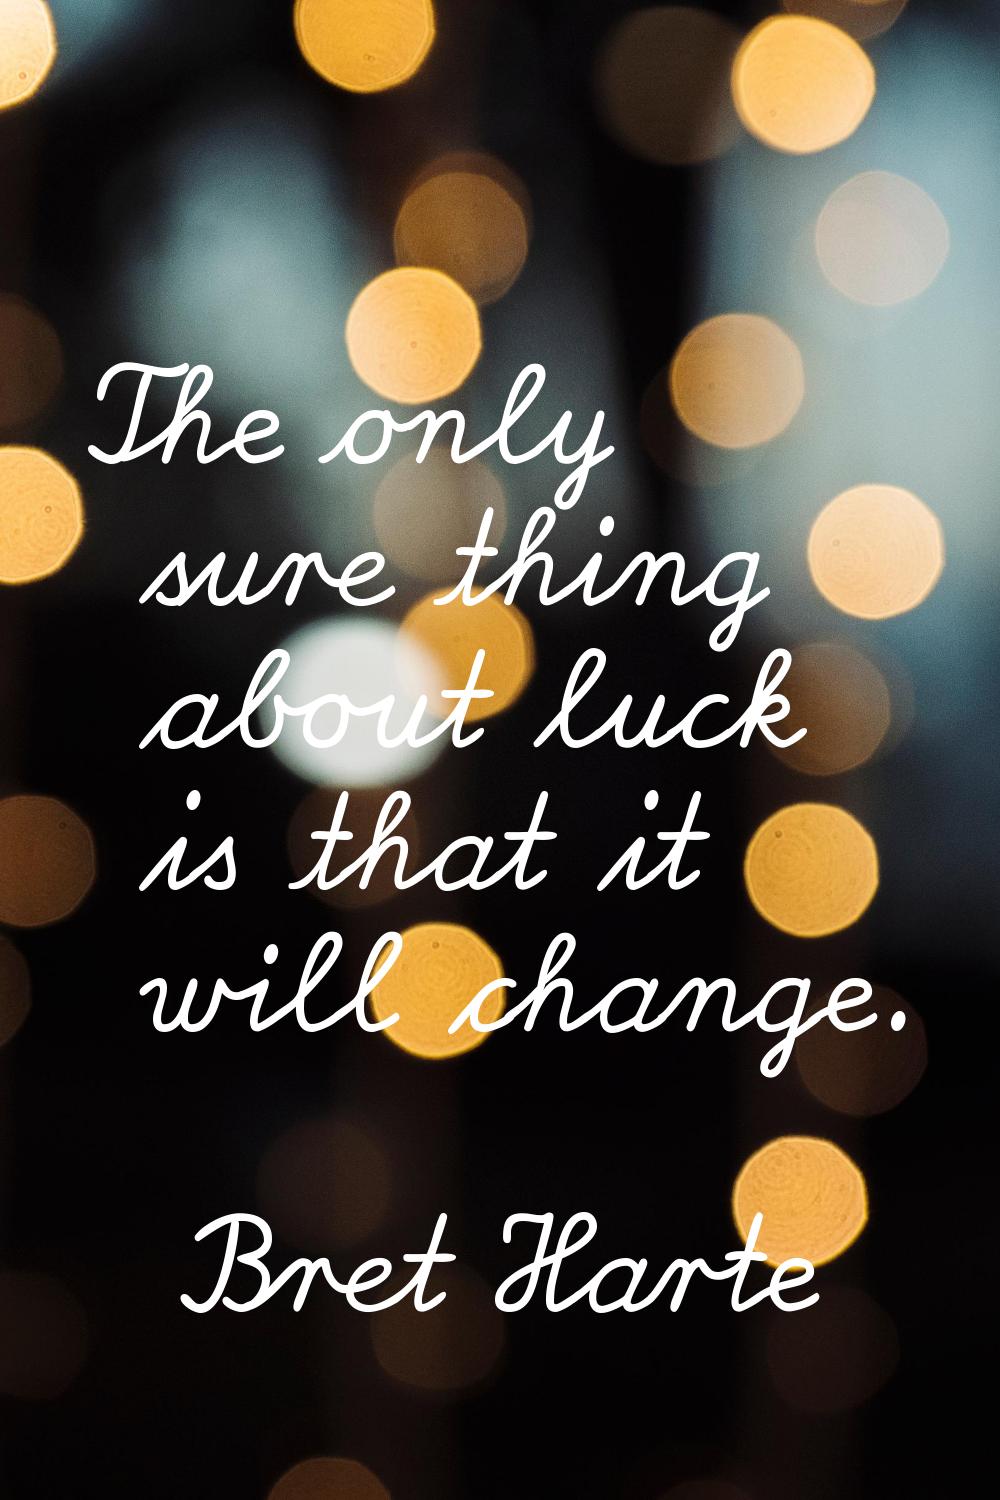 The only sure thing about luck is that it will change.